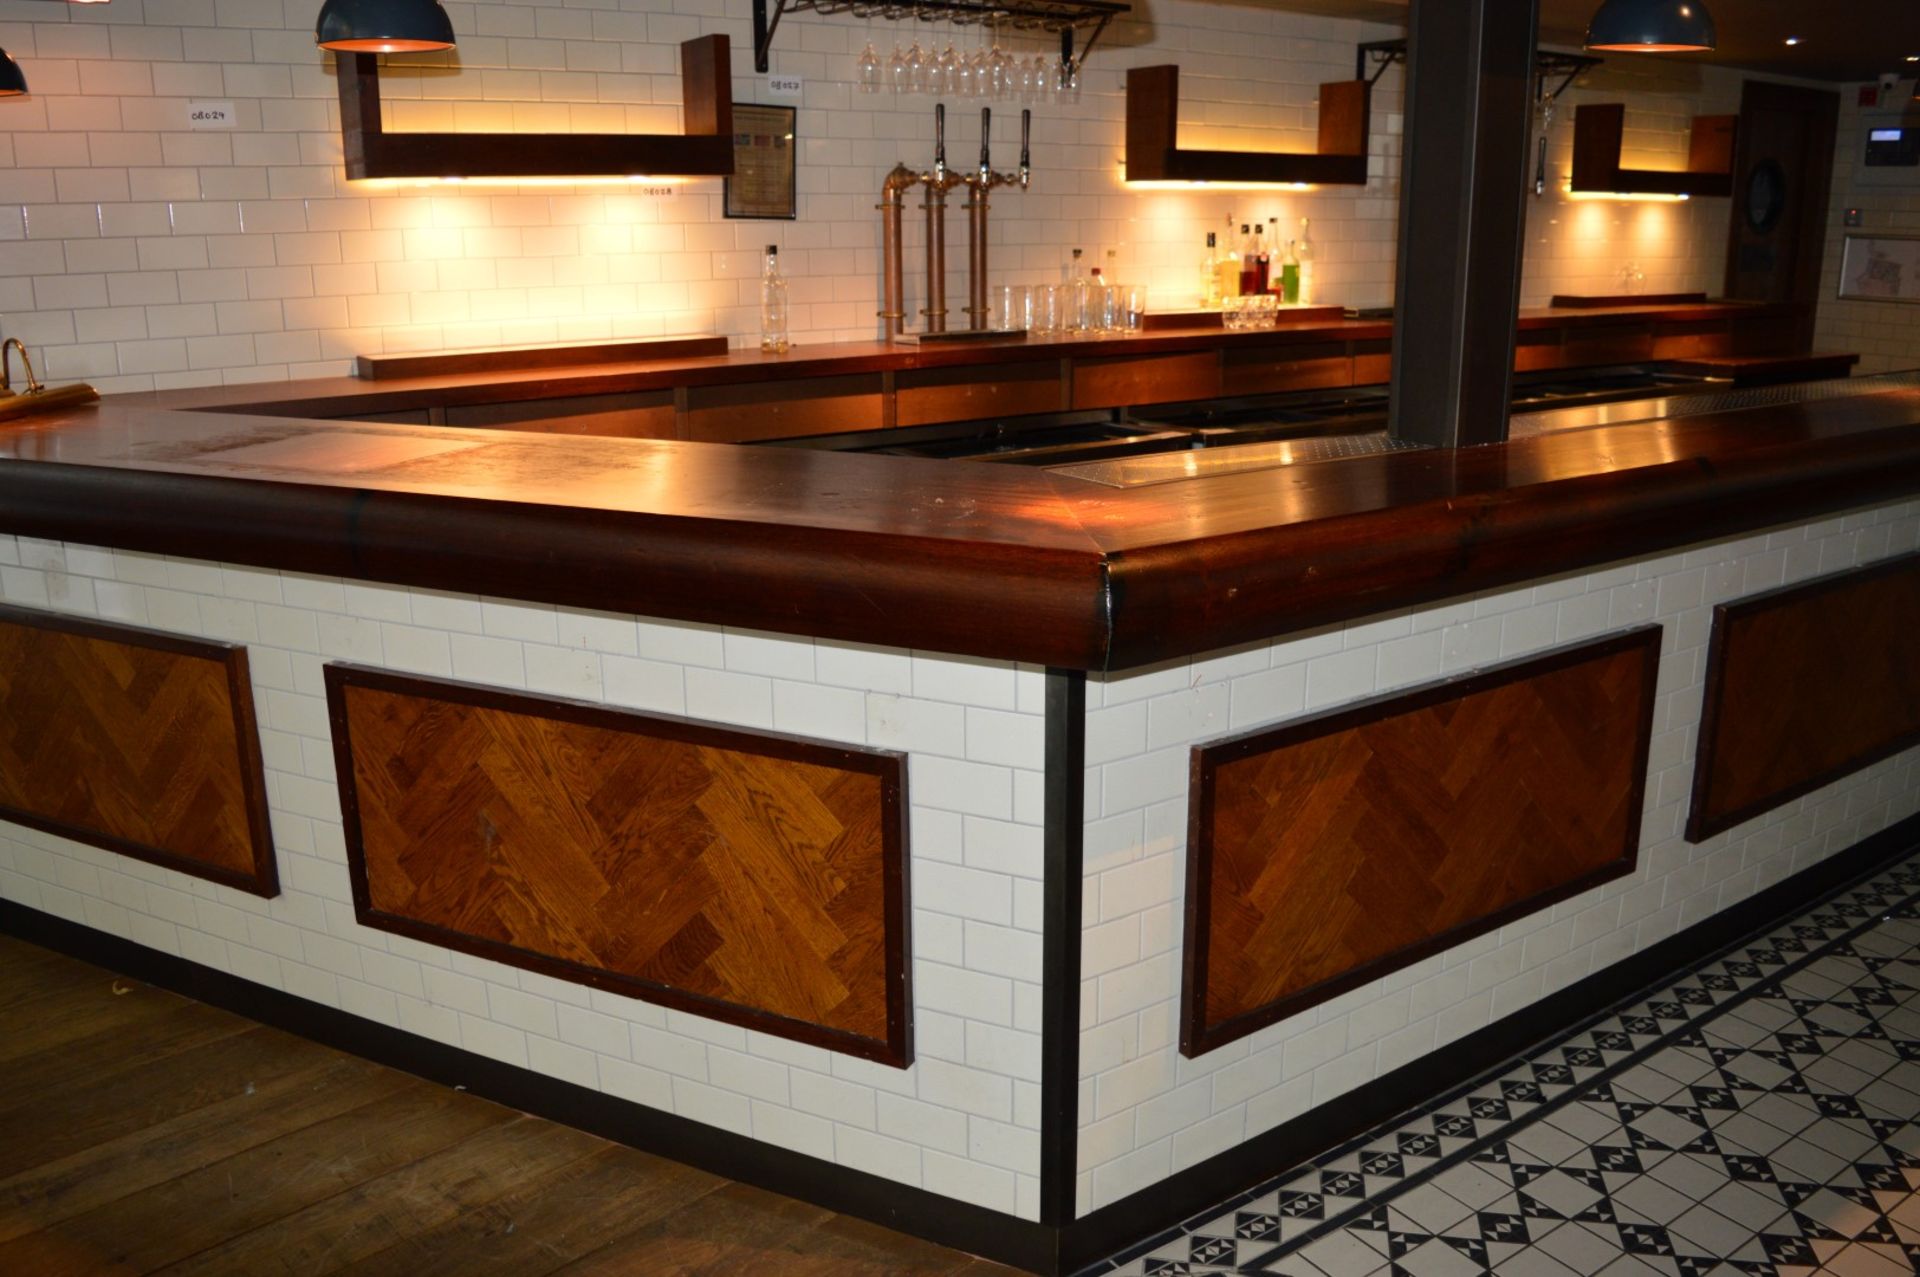 1 x Large Pub / Restuarant Bar With Tiled Front and Framed Parquet Flooring Design - Also Includes - Image 21 of 25